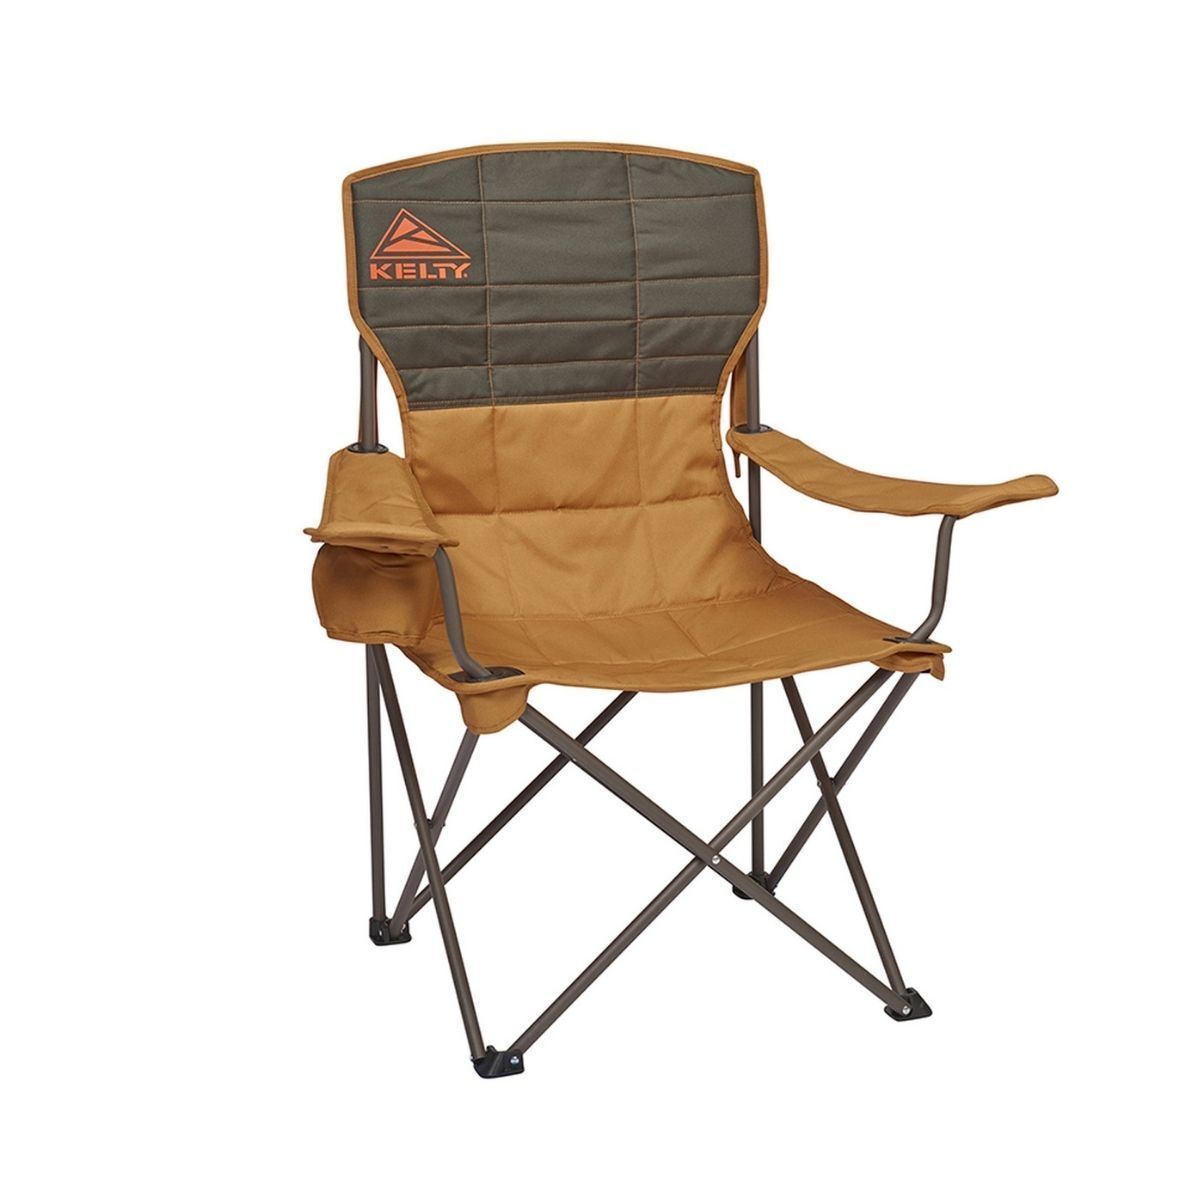 Kelty Essential Chair - Camp chair